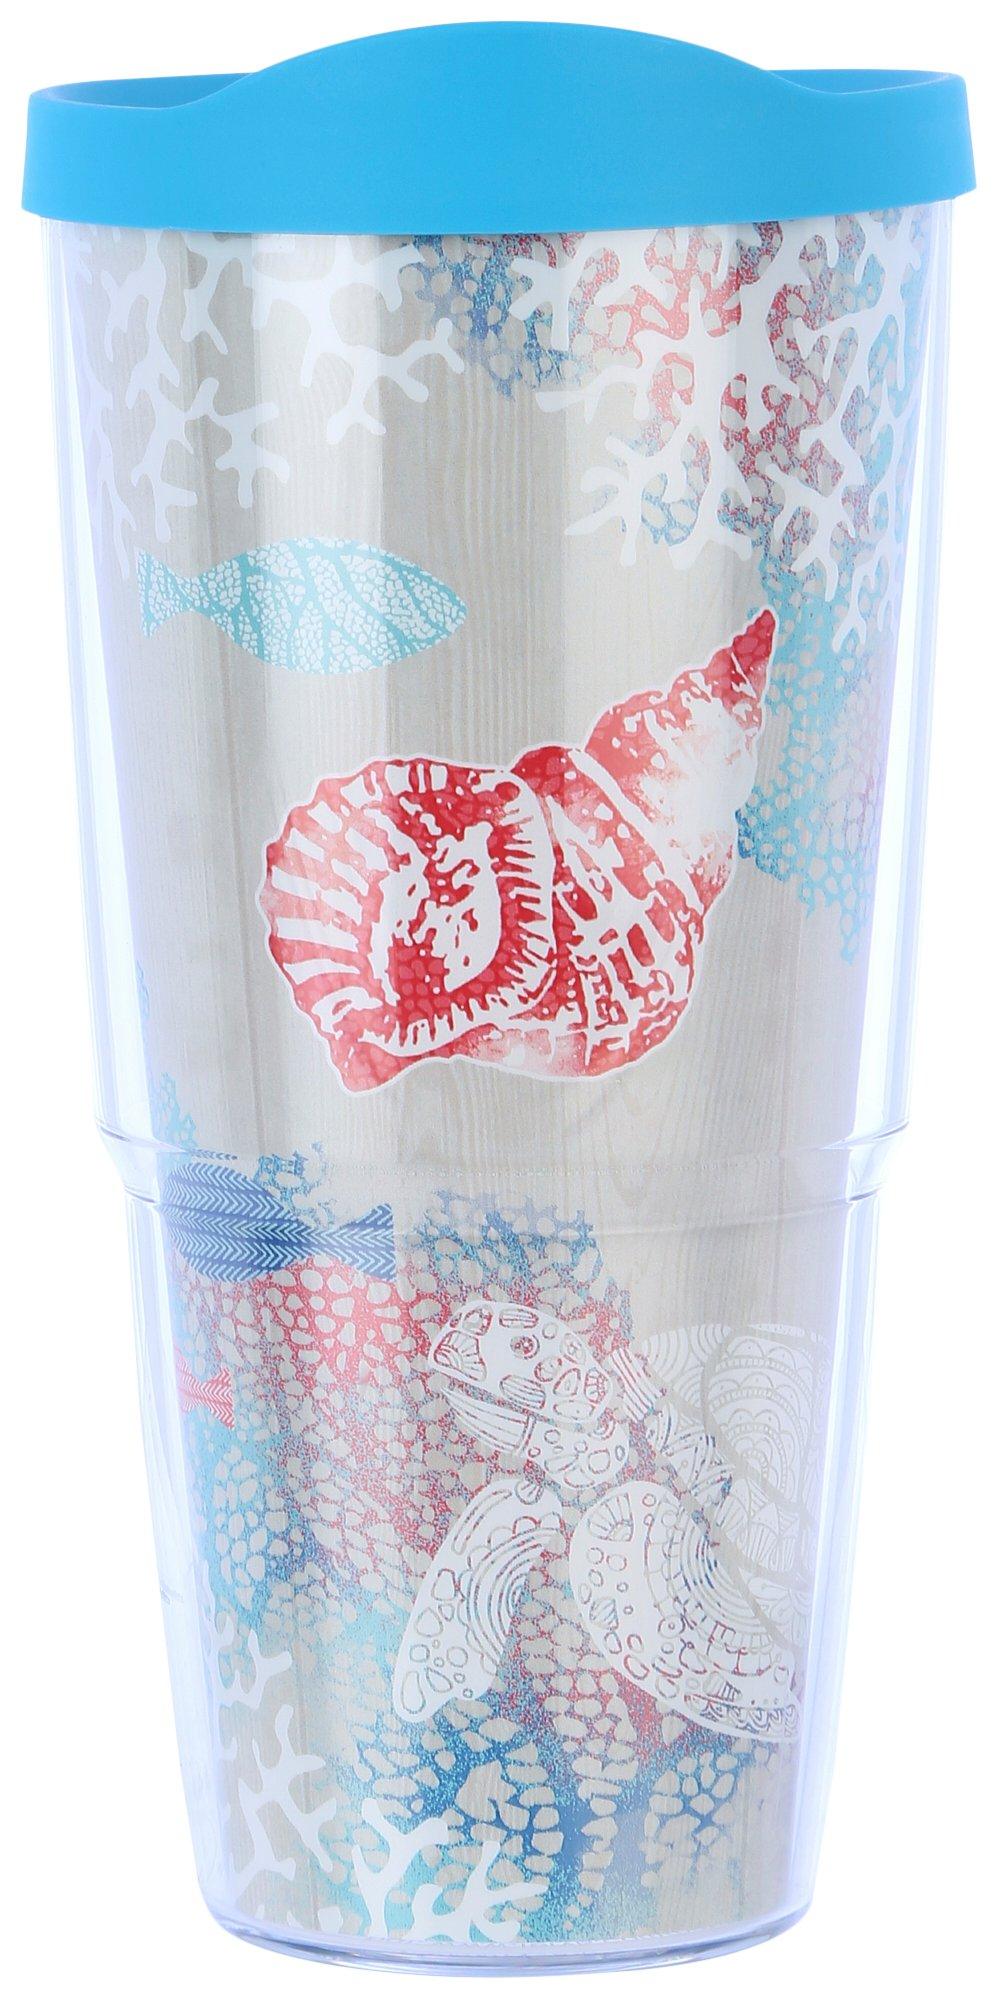 24 oz. Starfish Shores Tumbler With Lid